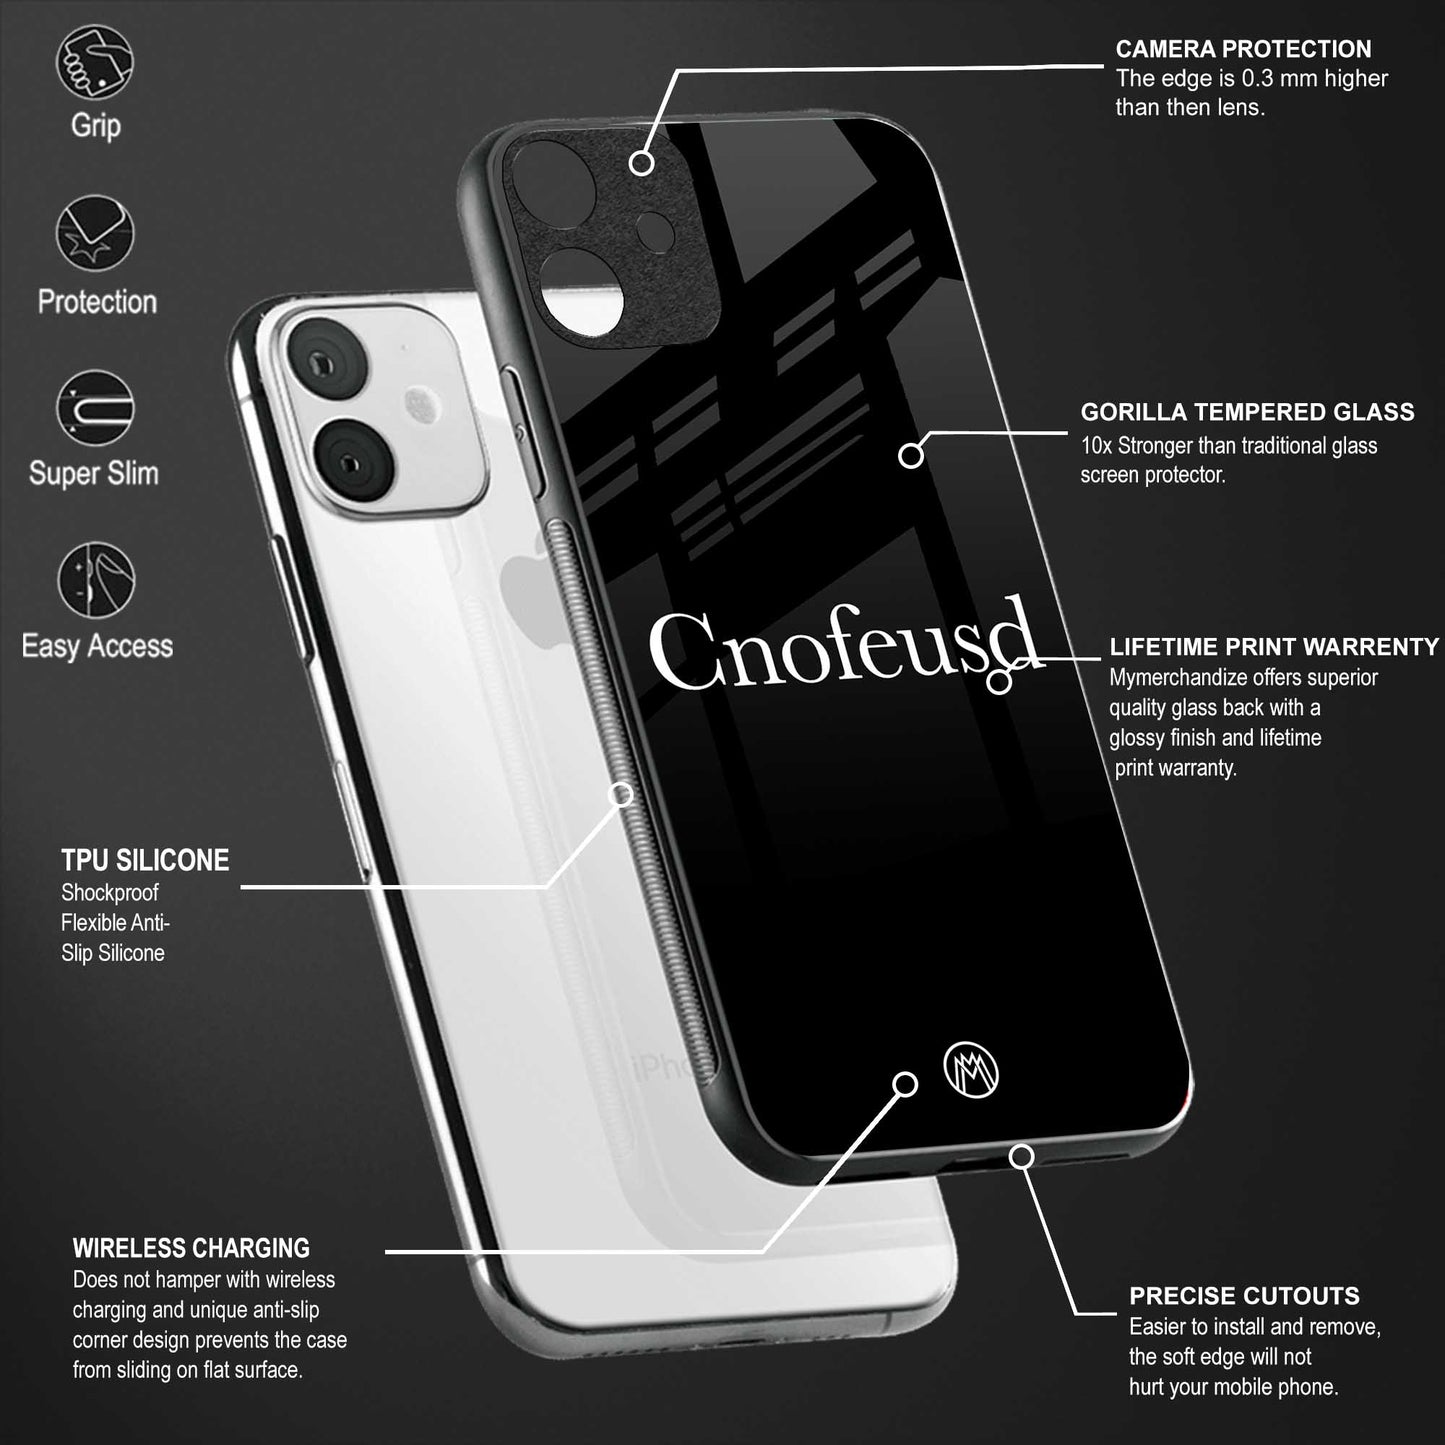 cnofeusd confused black back phone cover | glass case for samsun galaxy a24 4g